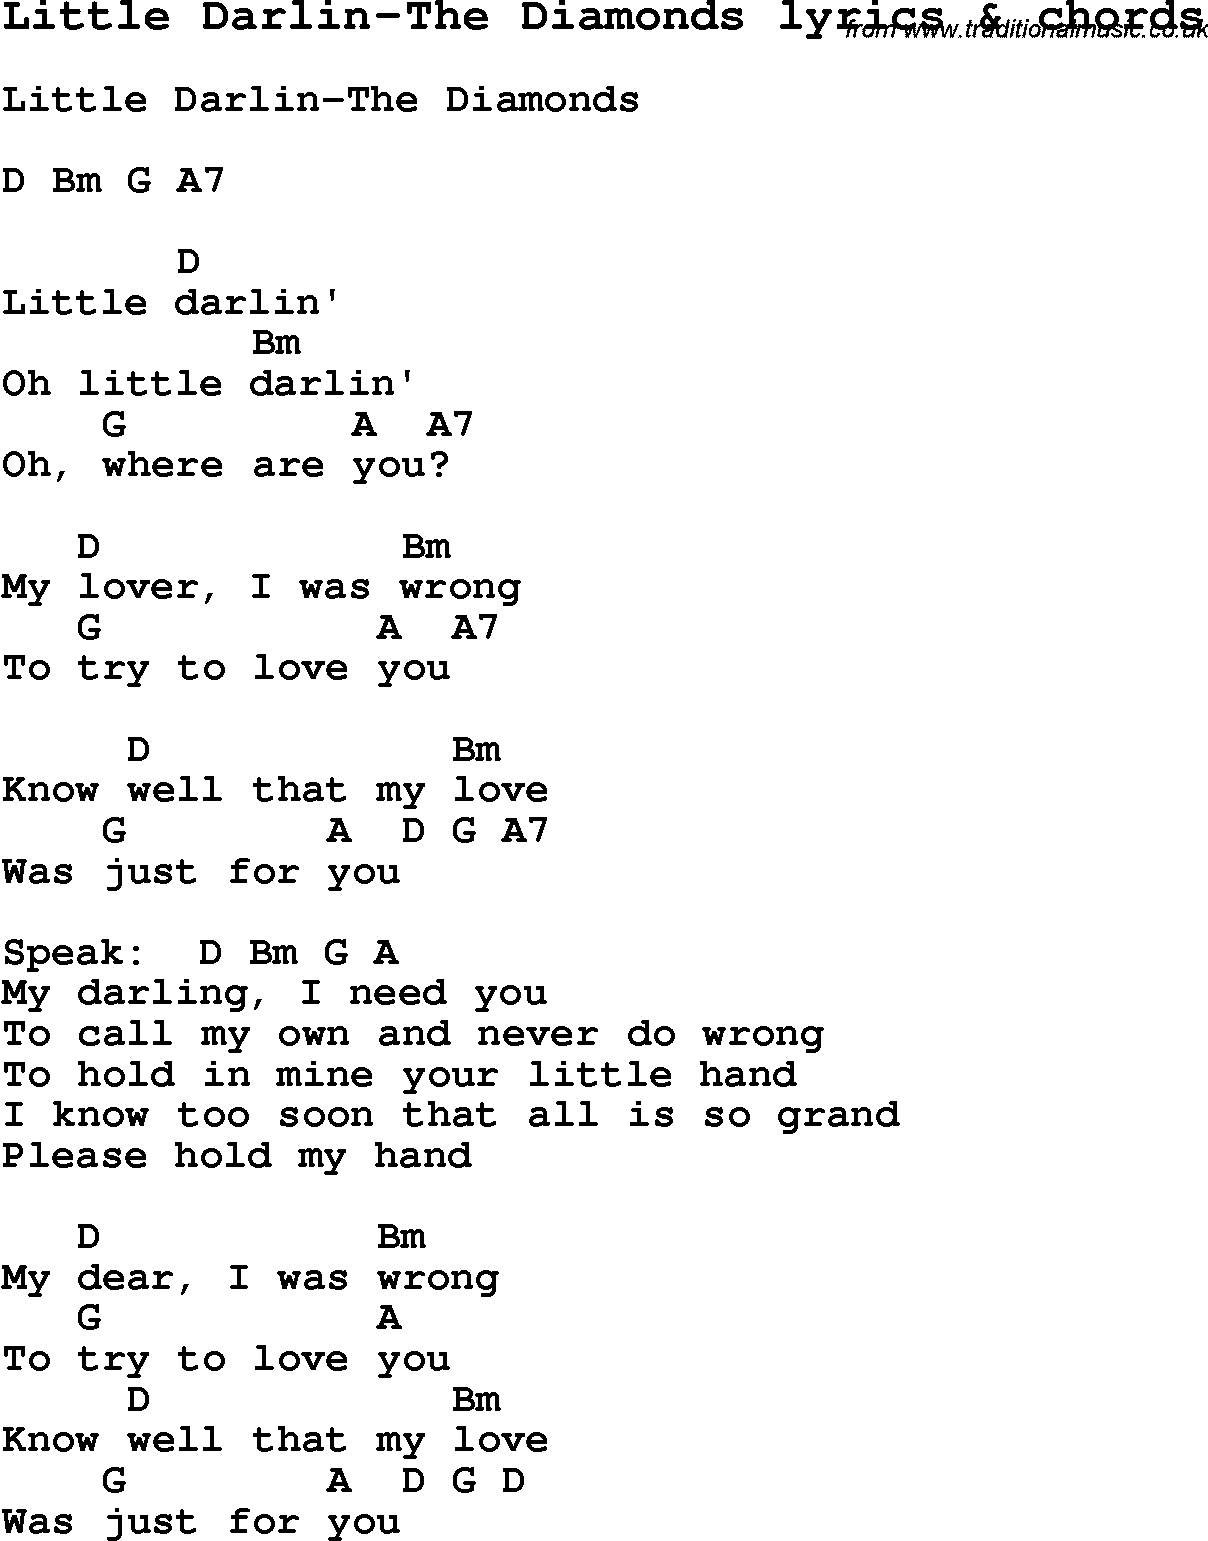 Love Song Lyrics for:Little Darlin-The Diamonds with chords.